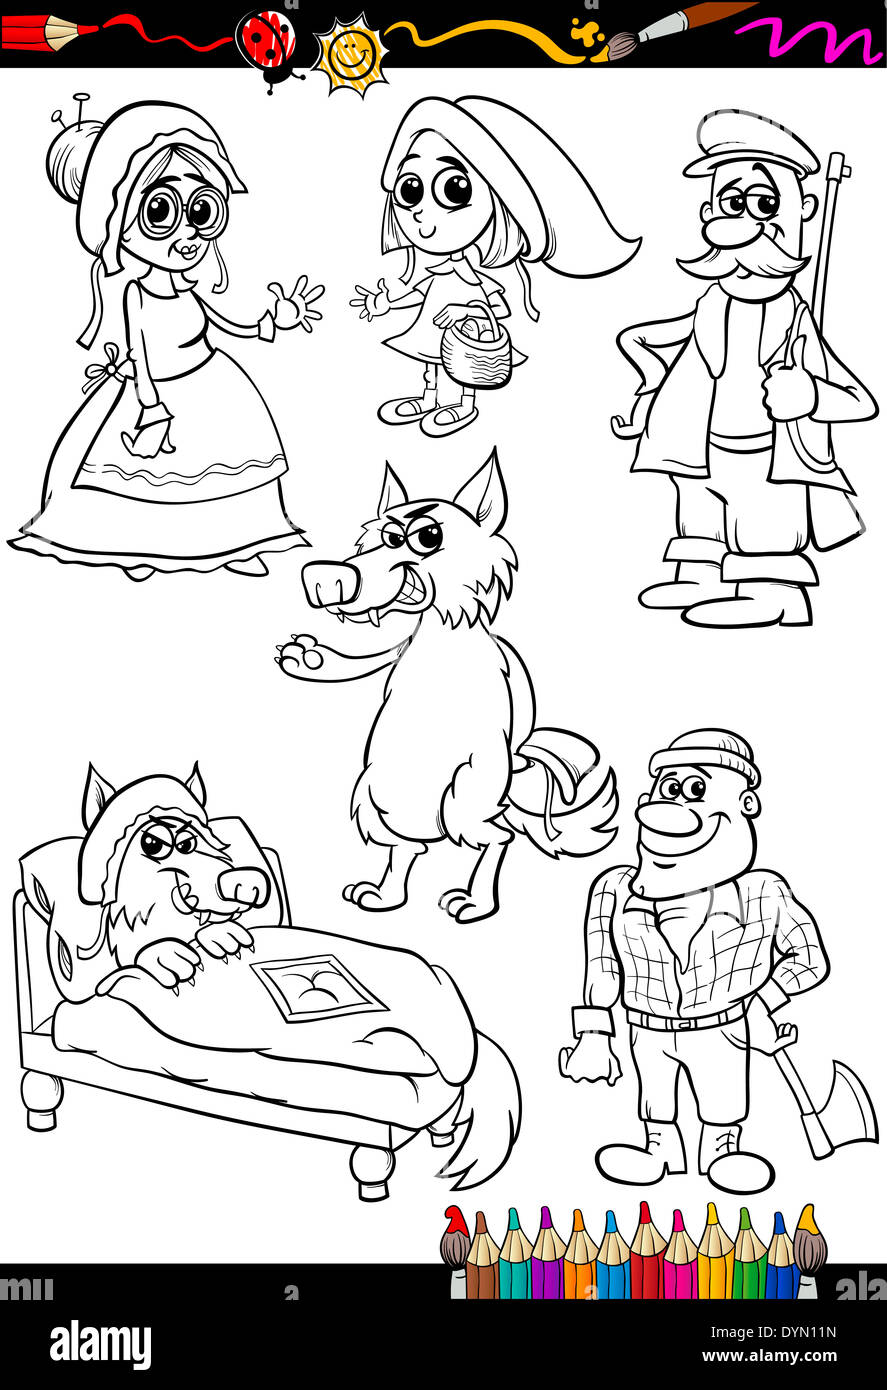 Coloring Book Or Page Cartoon Illustration Set Of Black And White